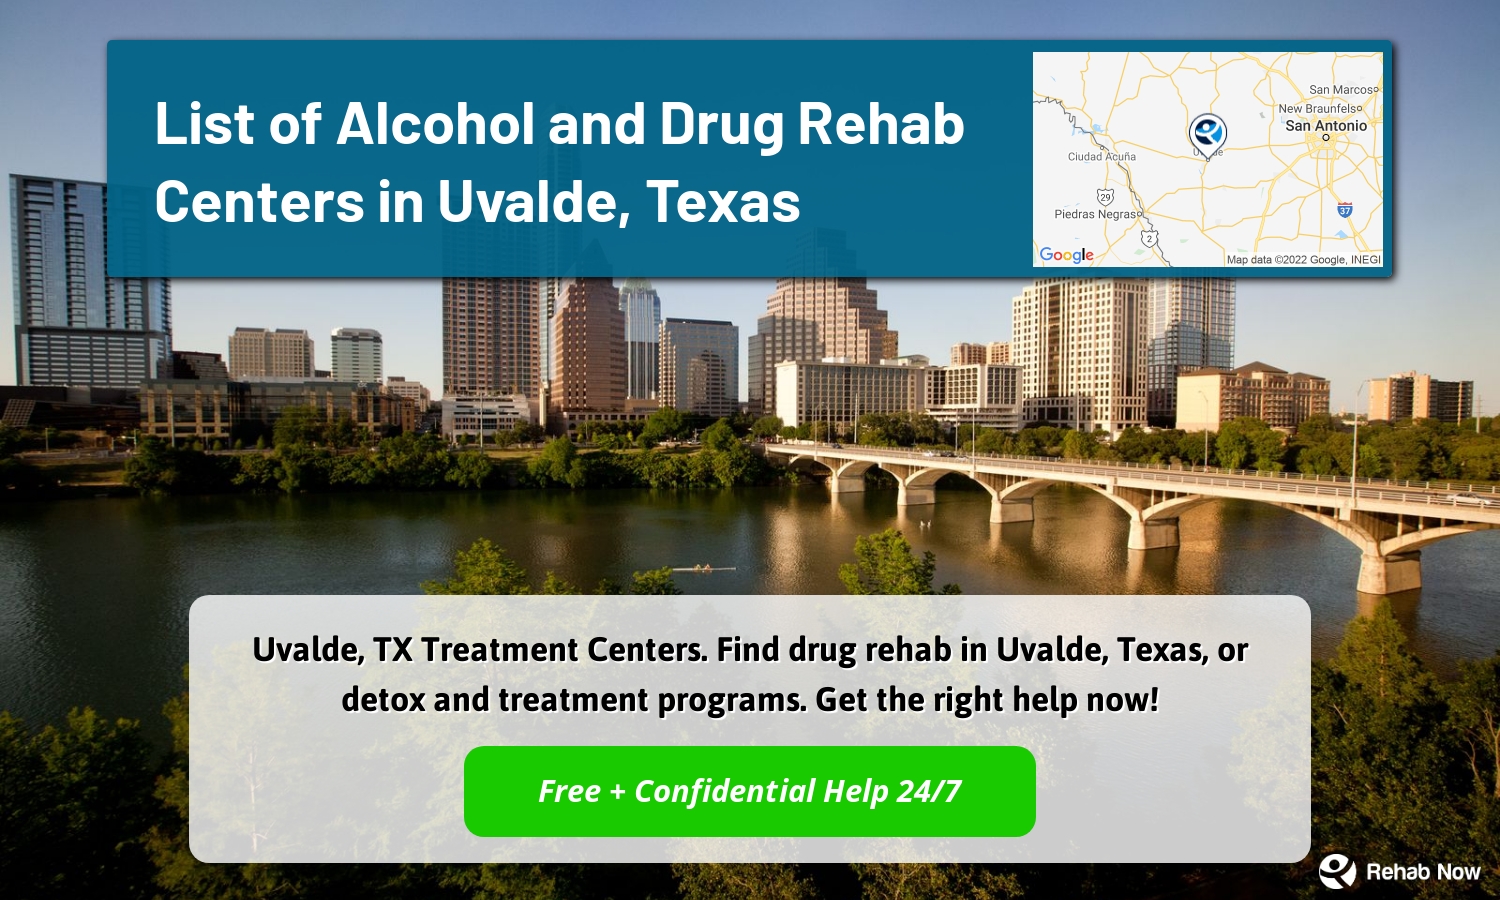 Uvalde, TX Treatment Centers. Find drug rehab in Uvalde, Texas, or detox and treatment programs. Get the right help now!